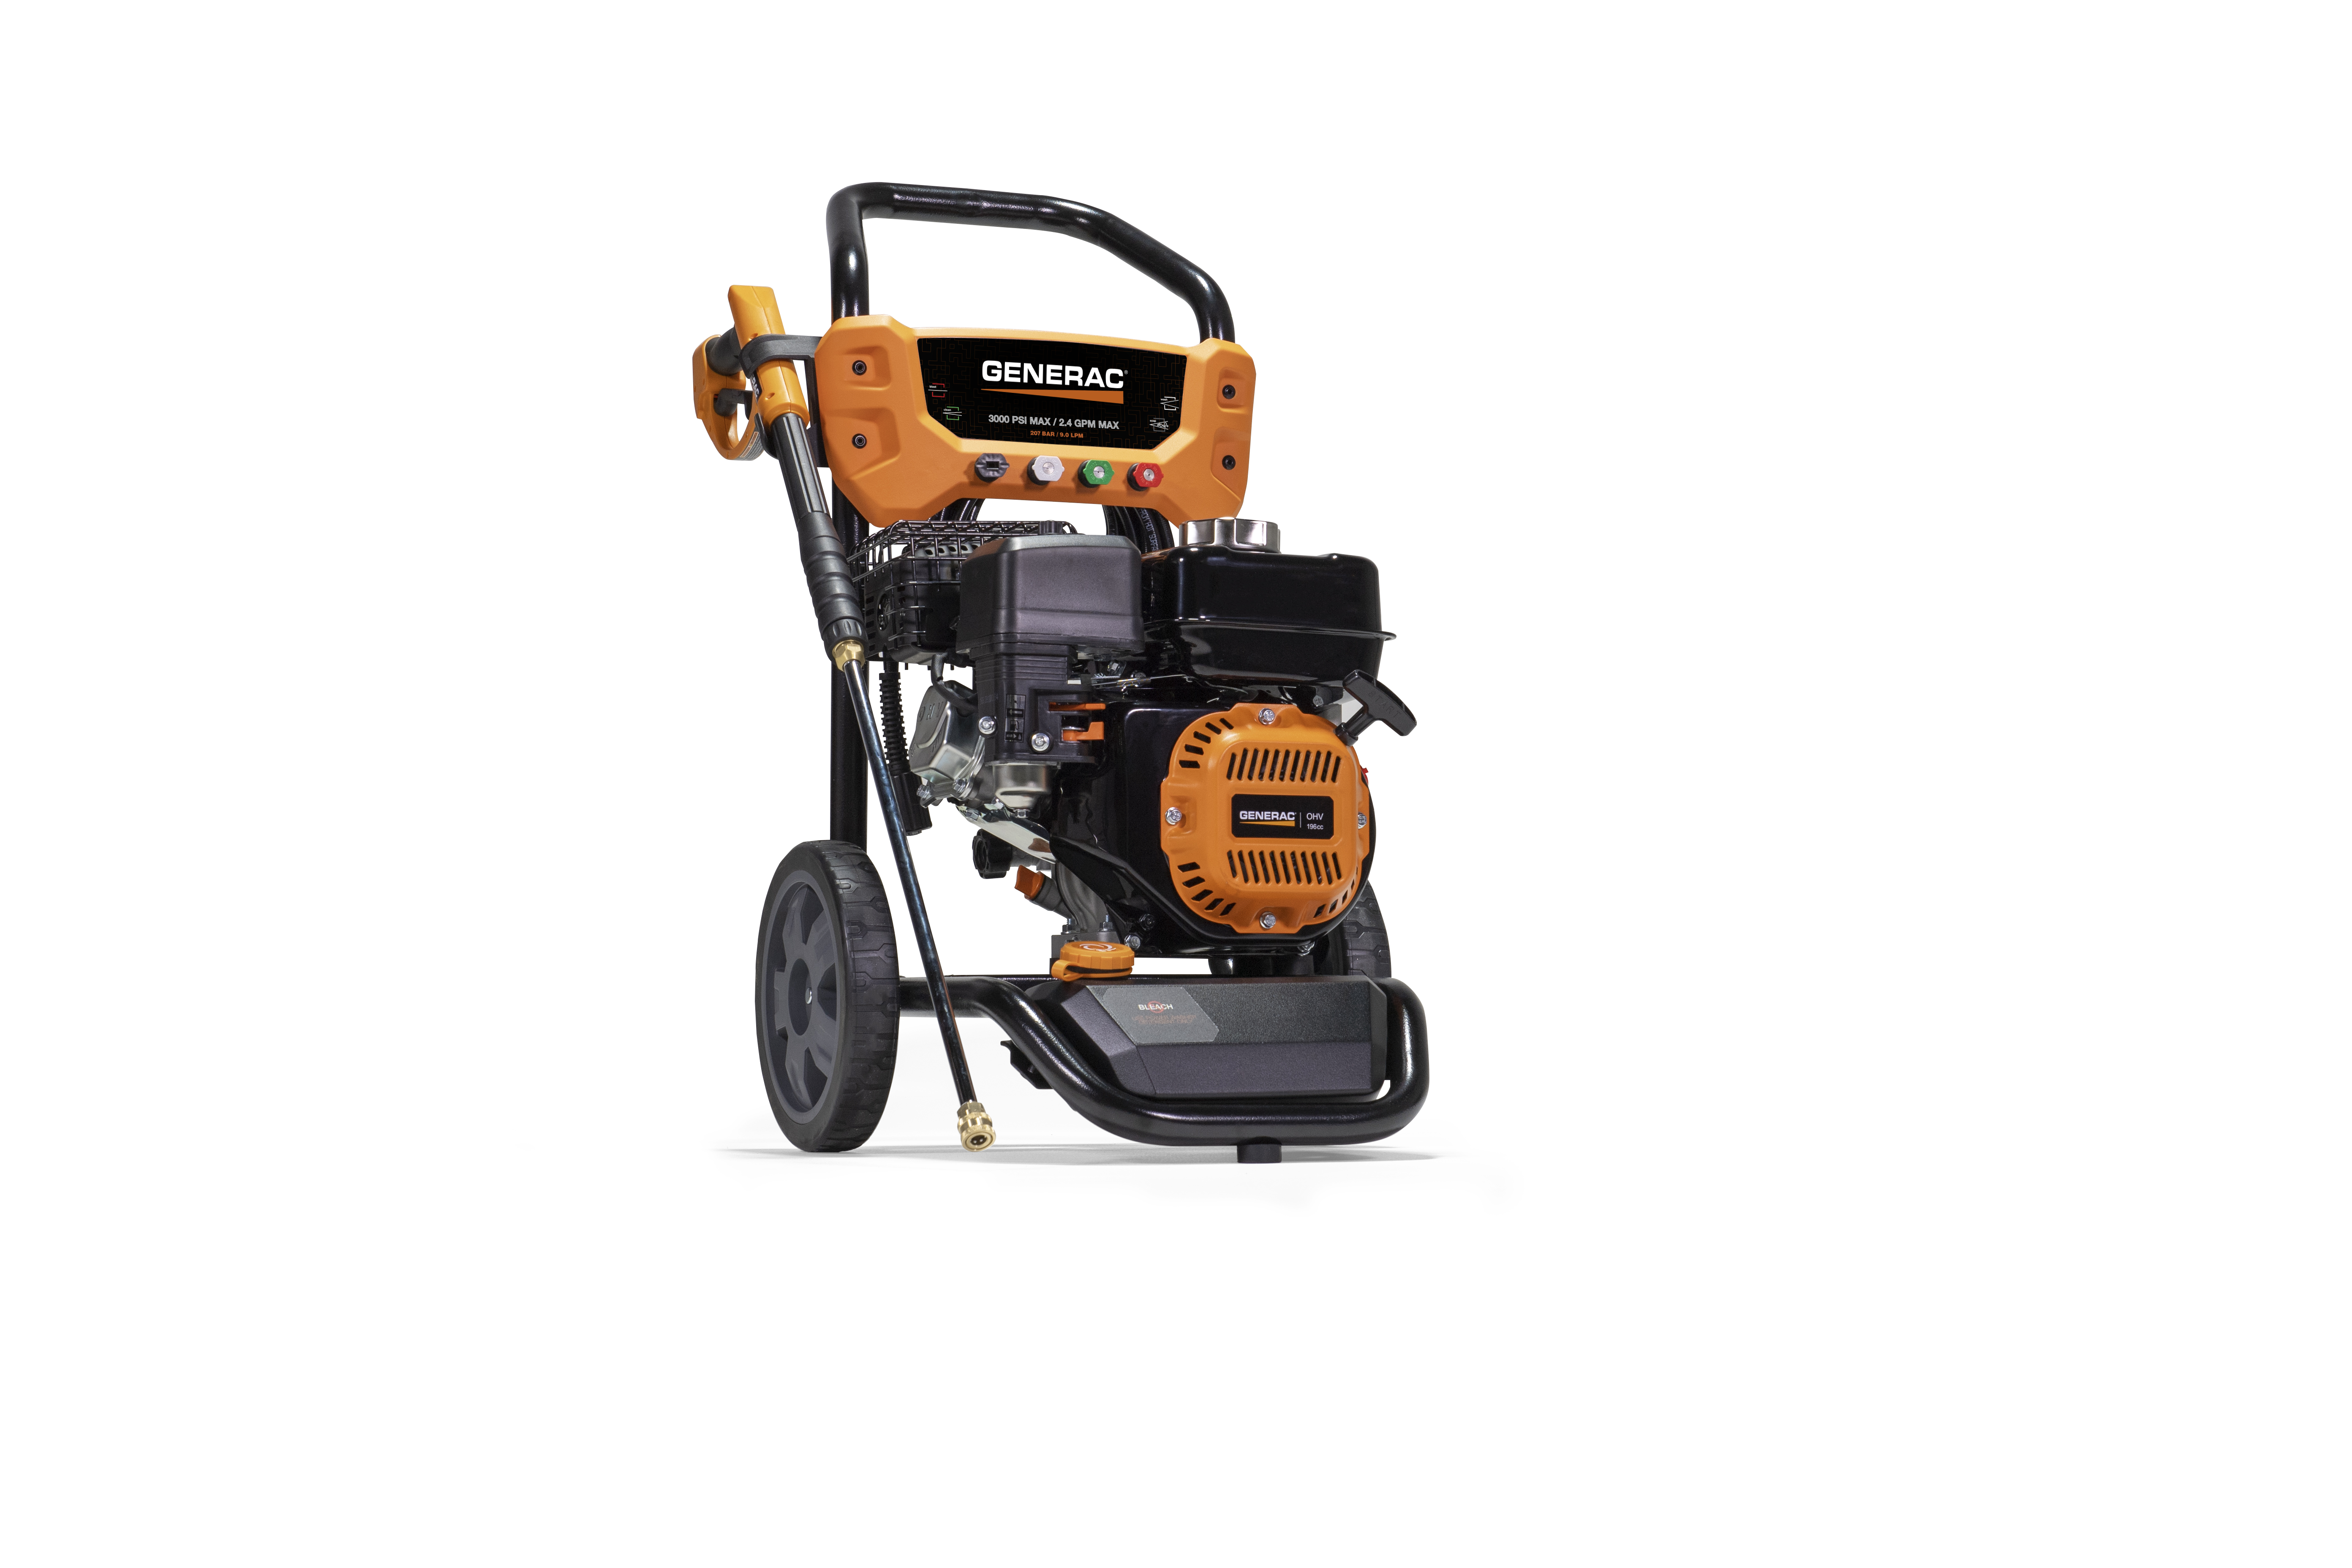 Generac 8896 3000 PSI 2.4GPM Gas Powered Residential Pressure Washer - image 1 of 3